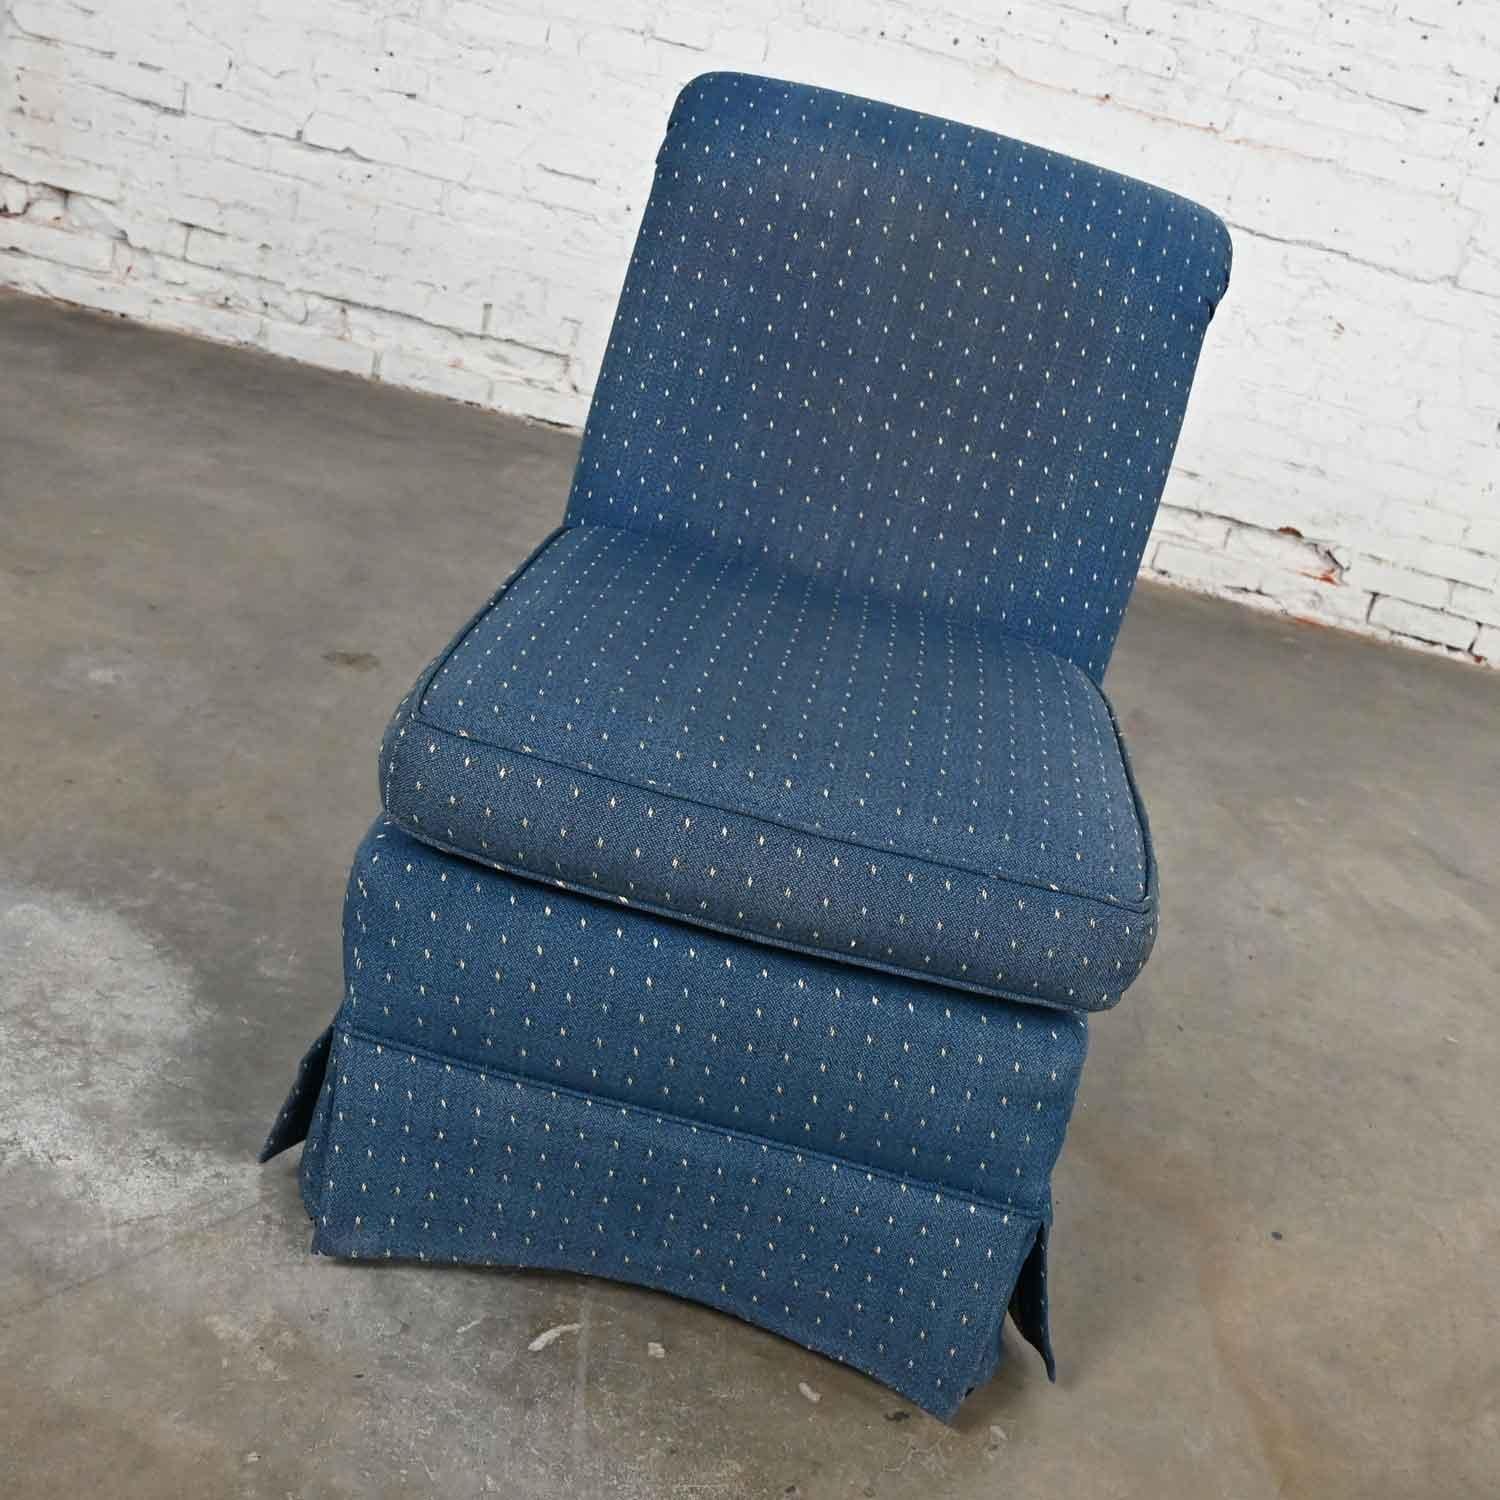 Traditional or Hollywood Regency Blue Rolled Back Slipper Chair with Casters In Good Condition For Sale In Topeka, KS